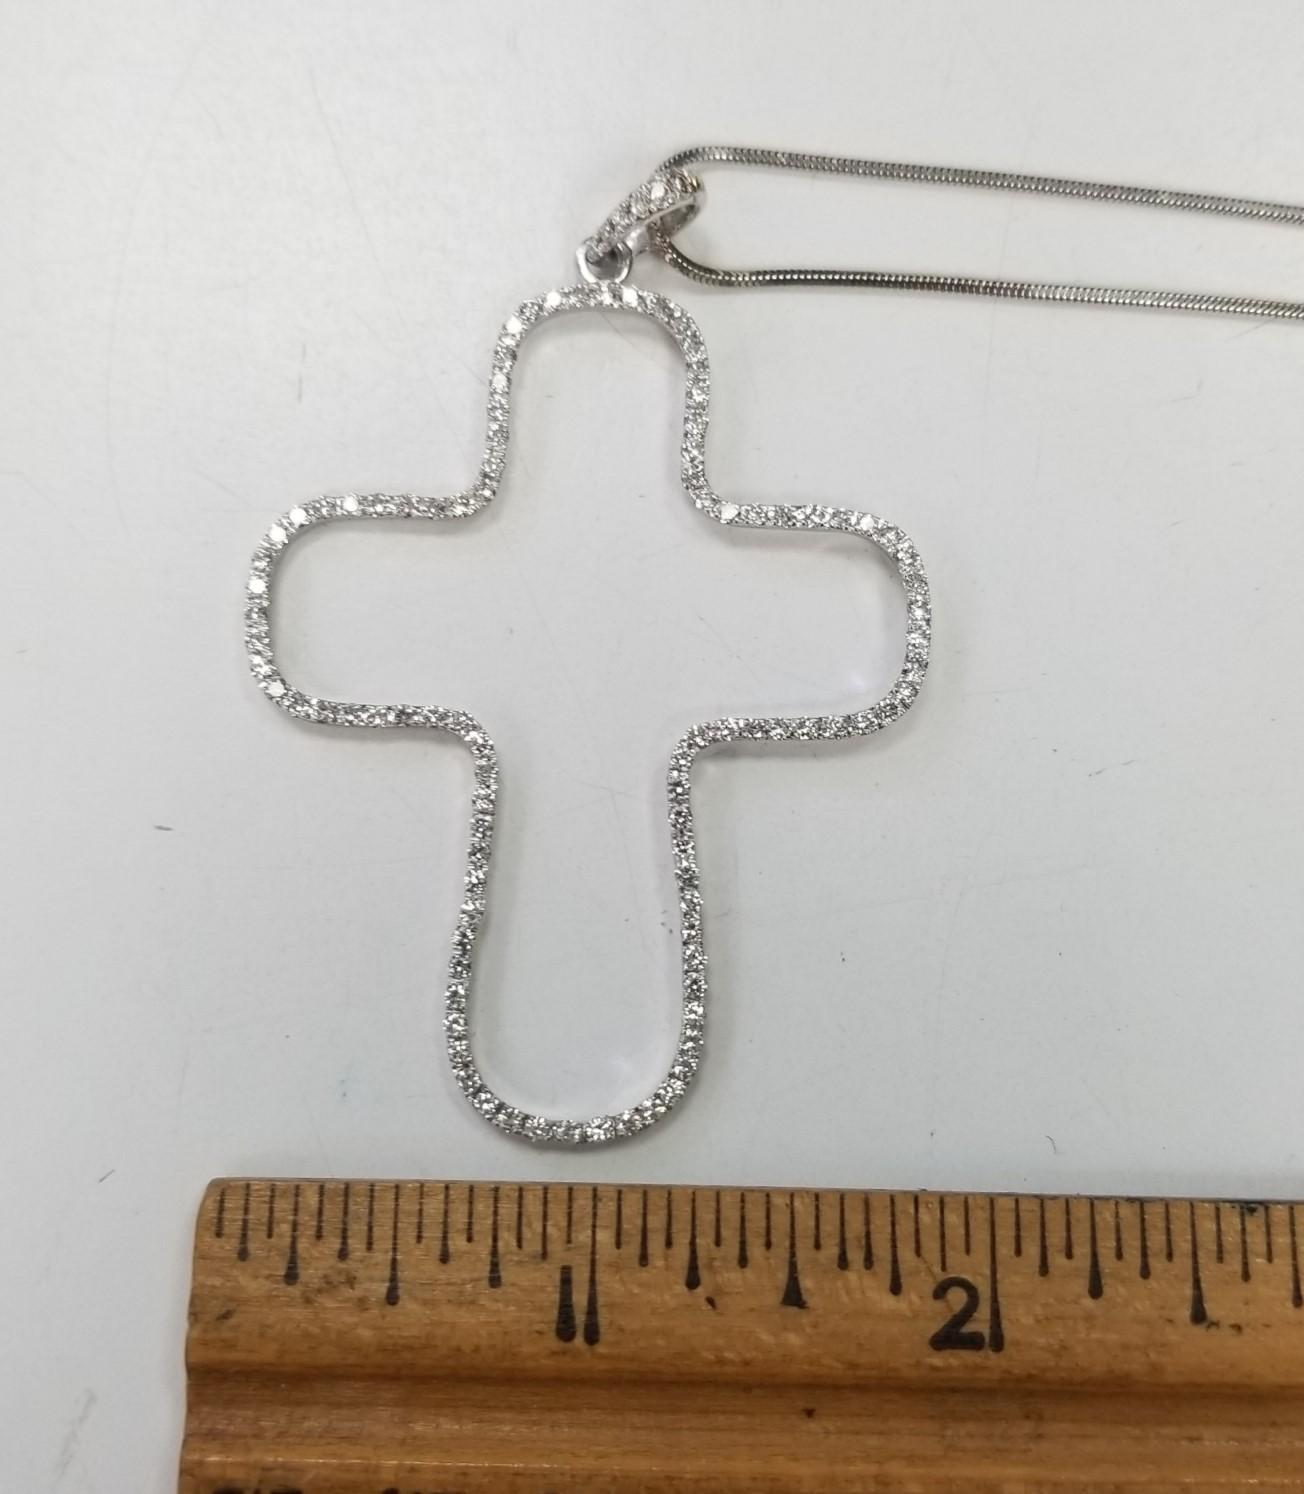 Specifications:
Pre-Owned (Great condition)
Metal: 18k White Gold
Stones: 175Diamonds Color G, clarity VS
Weight: 11 Gr
Length: 18 inch snake chain
Pendant dimensions: 47 mm x 70mm